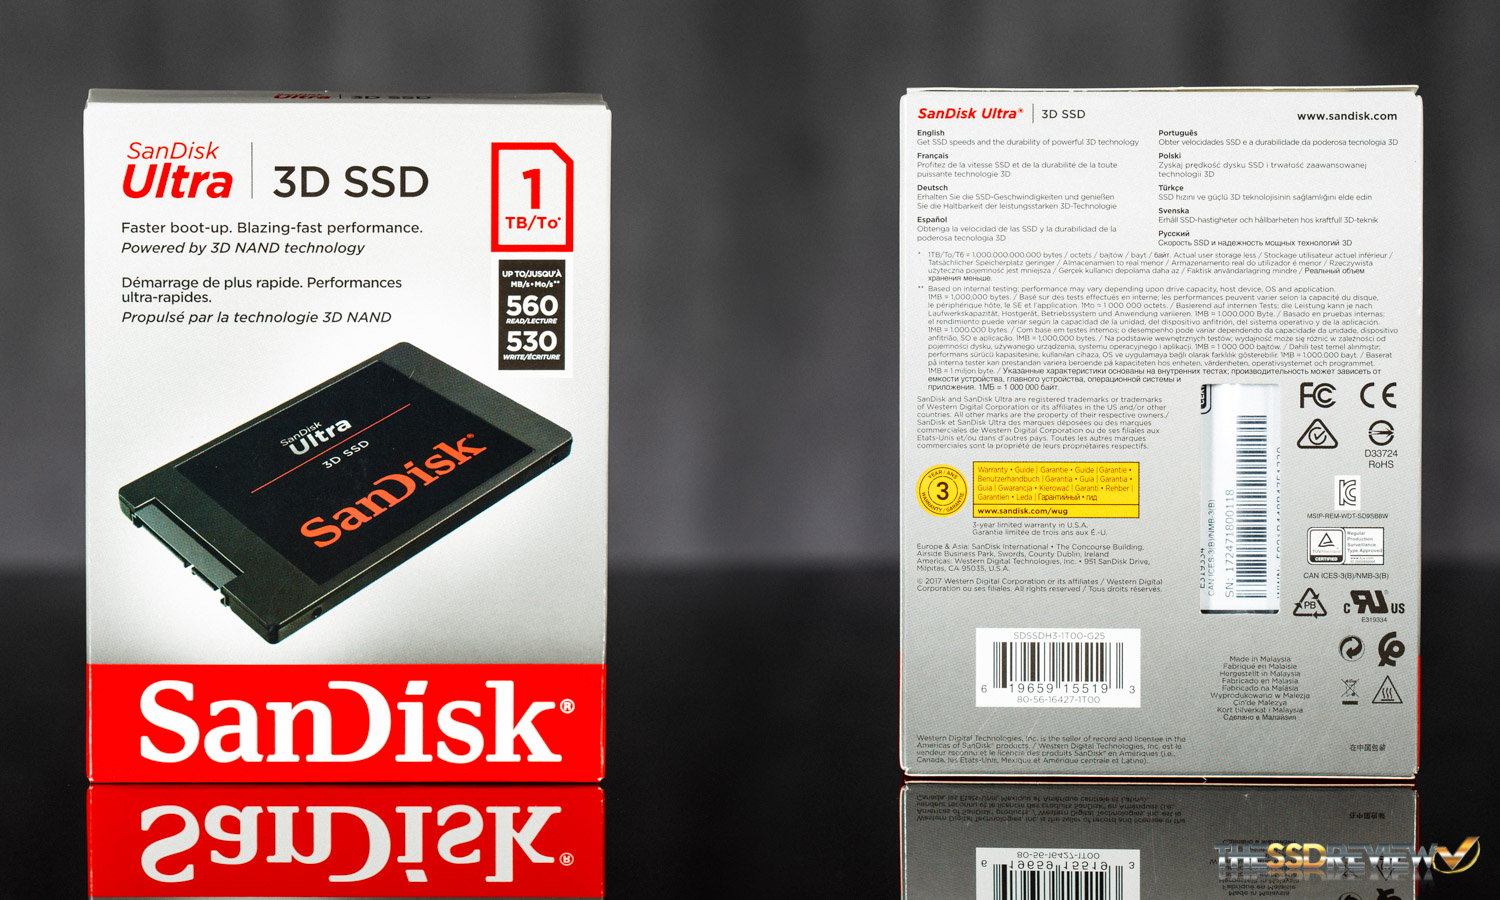 WD Blue 3D SSD & SanDisk Ultra 3D SSD Review (1TB) - Twins That